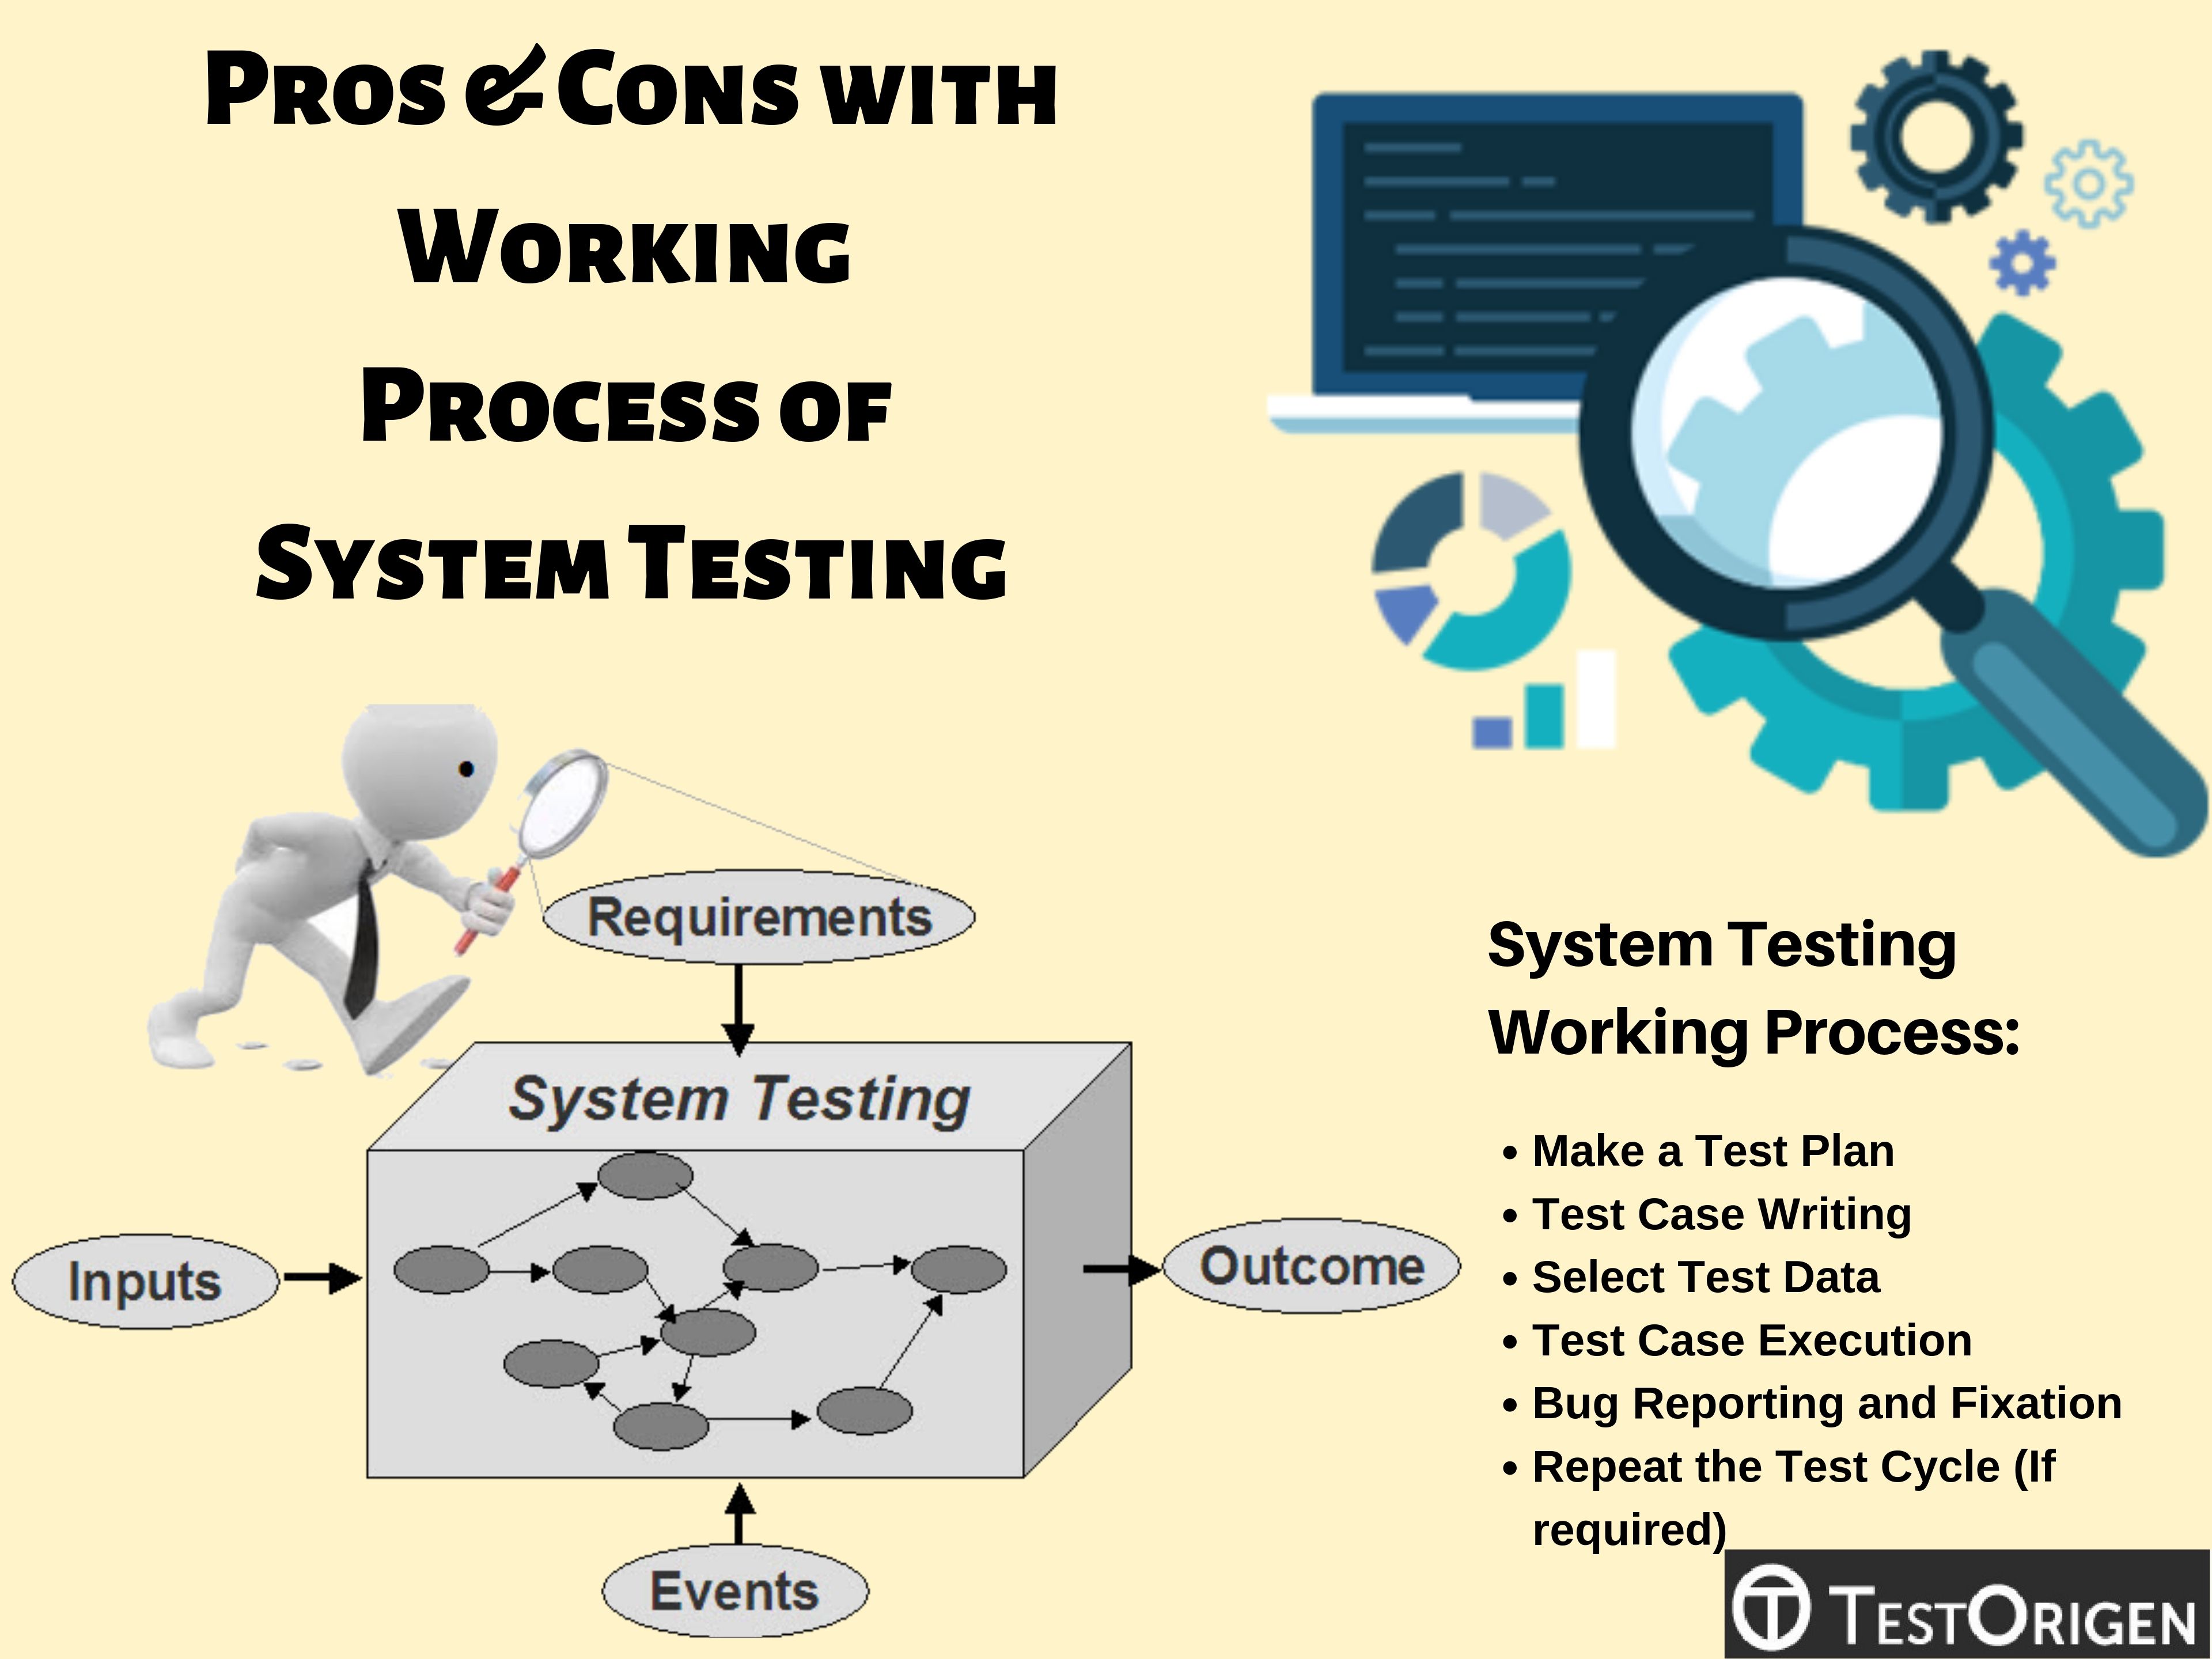 Pros & Cons with Working Process of System Testing